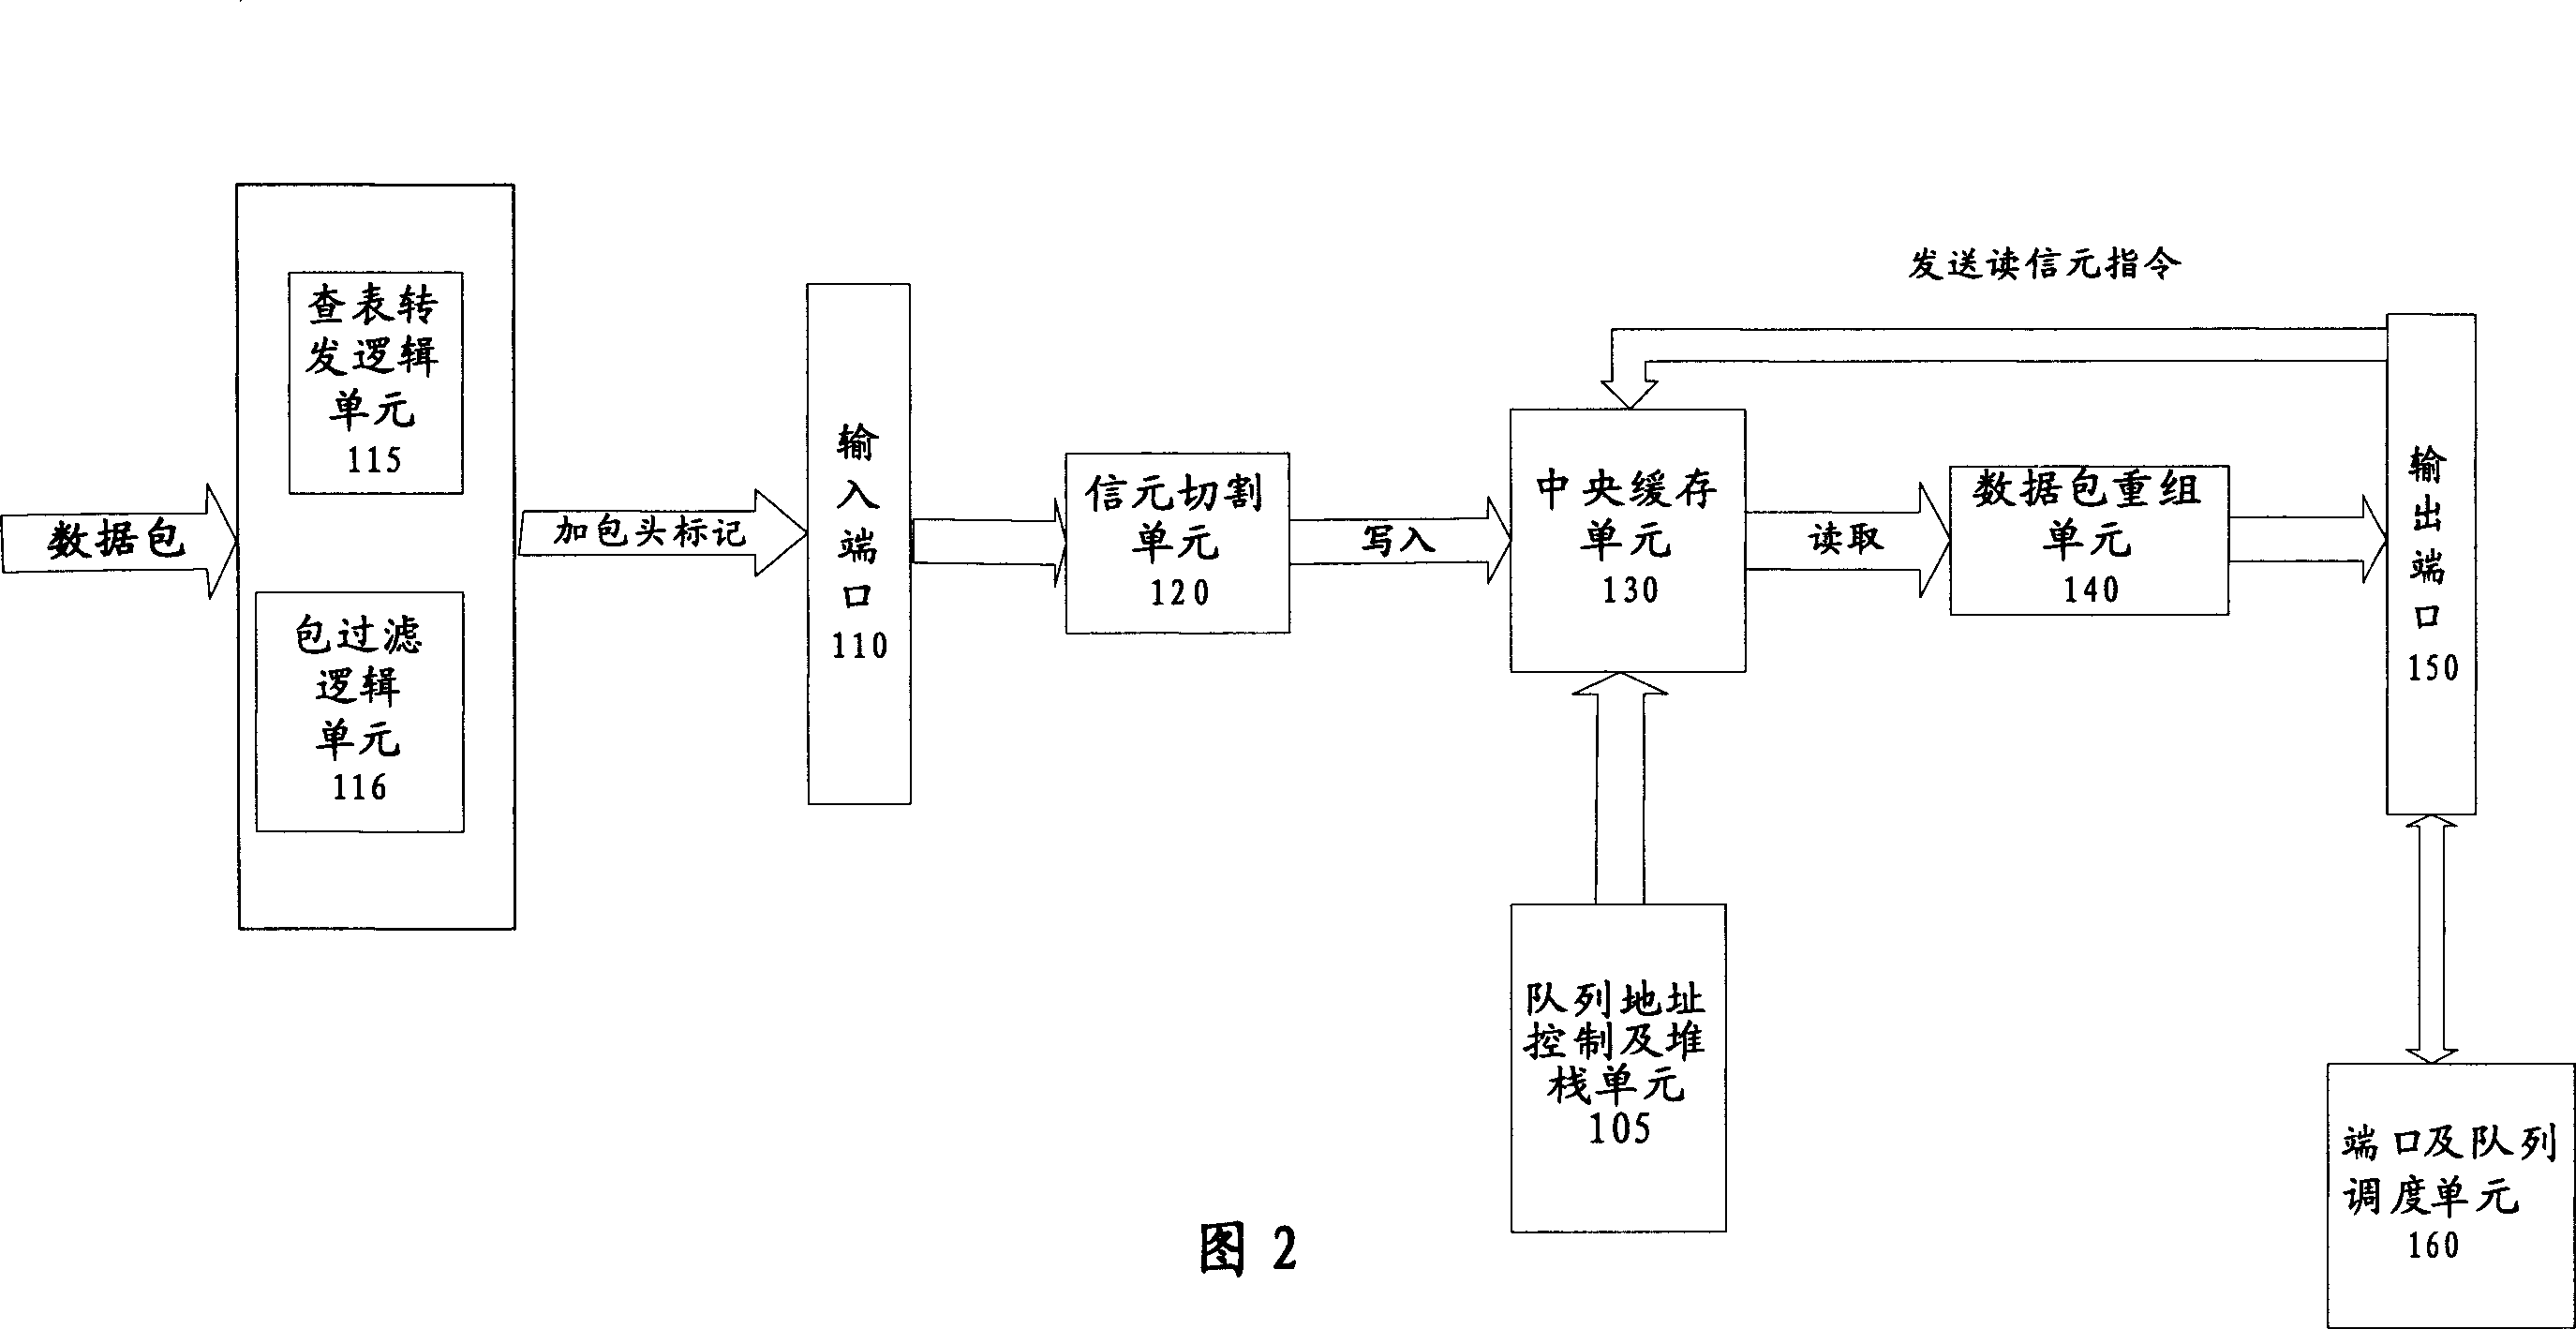 Ethernet cache exchanging and scheduling method and apparatus